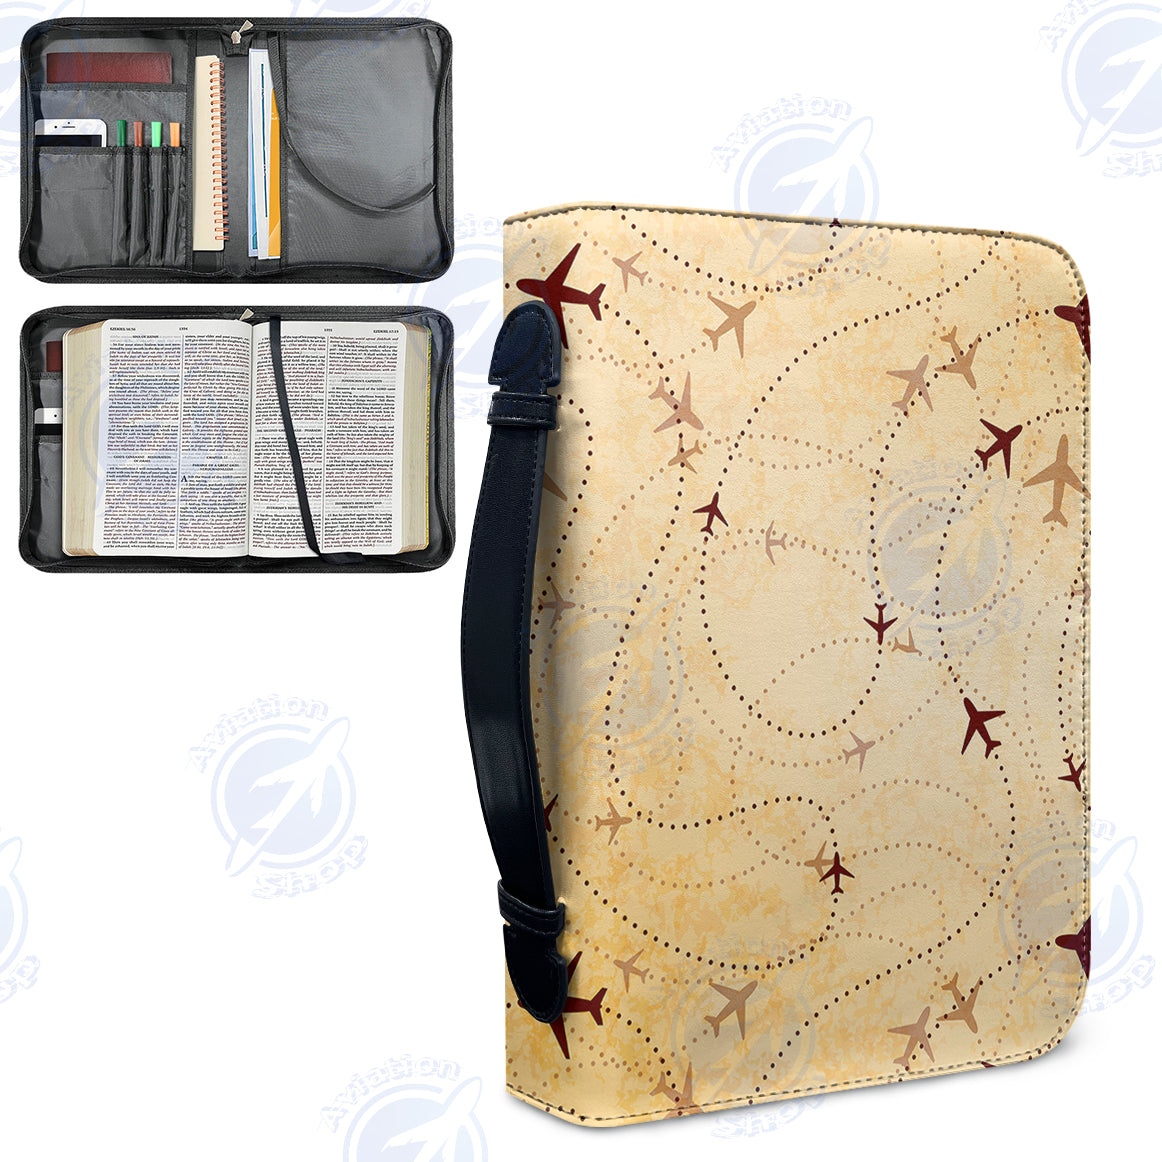 Vintage Travelling with Aircraft Designed PU Accessories Bags